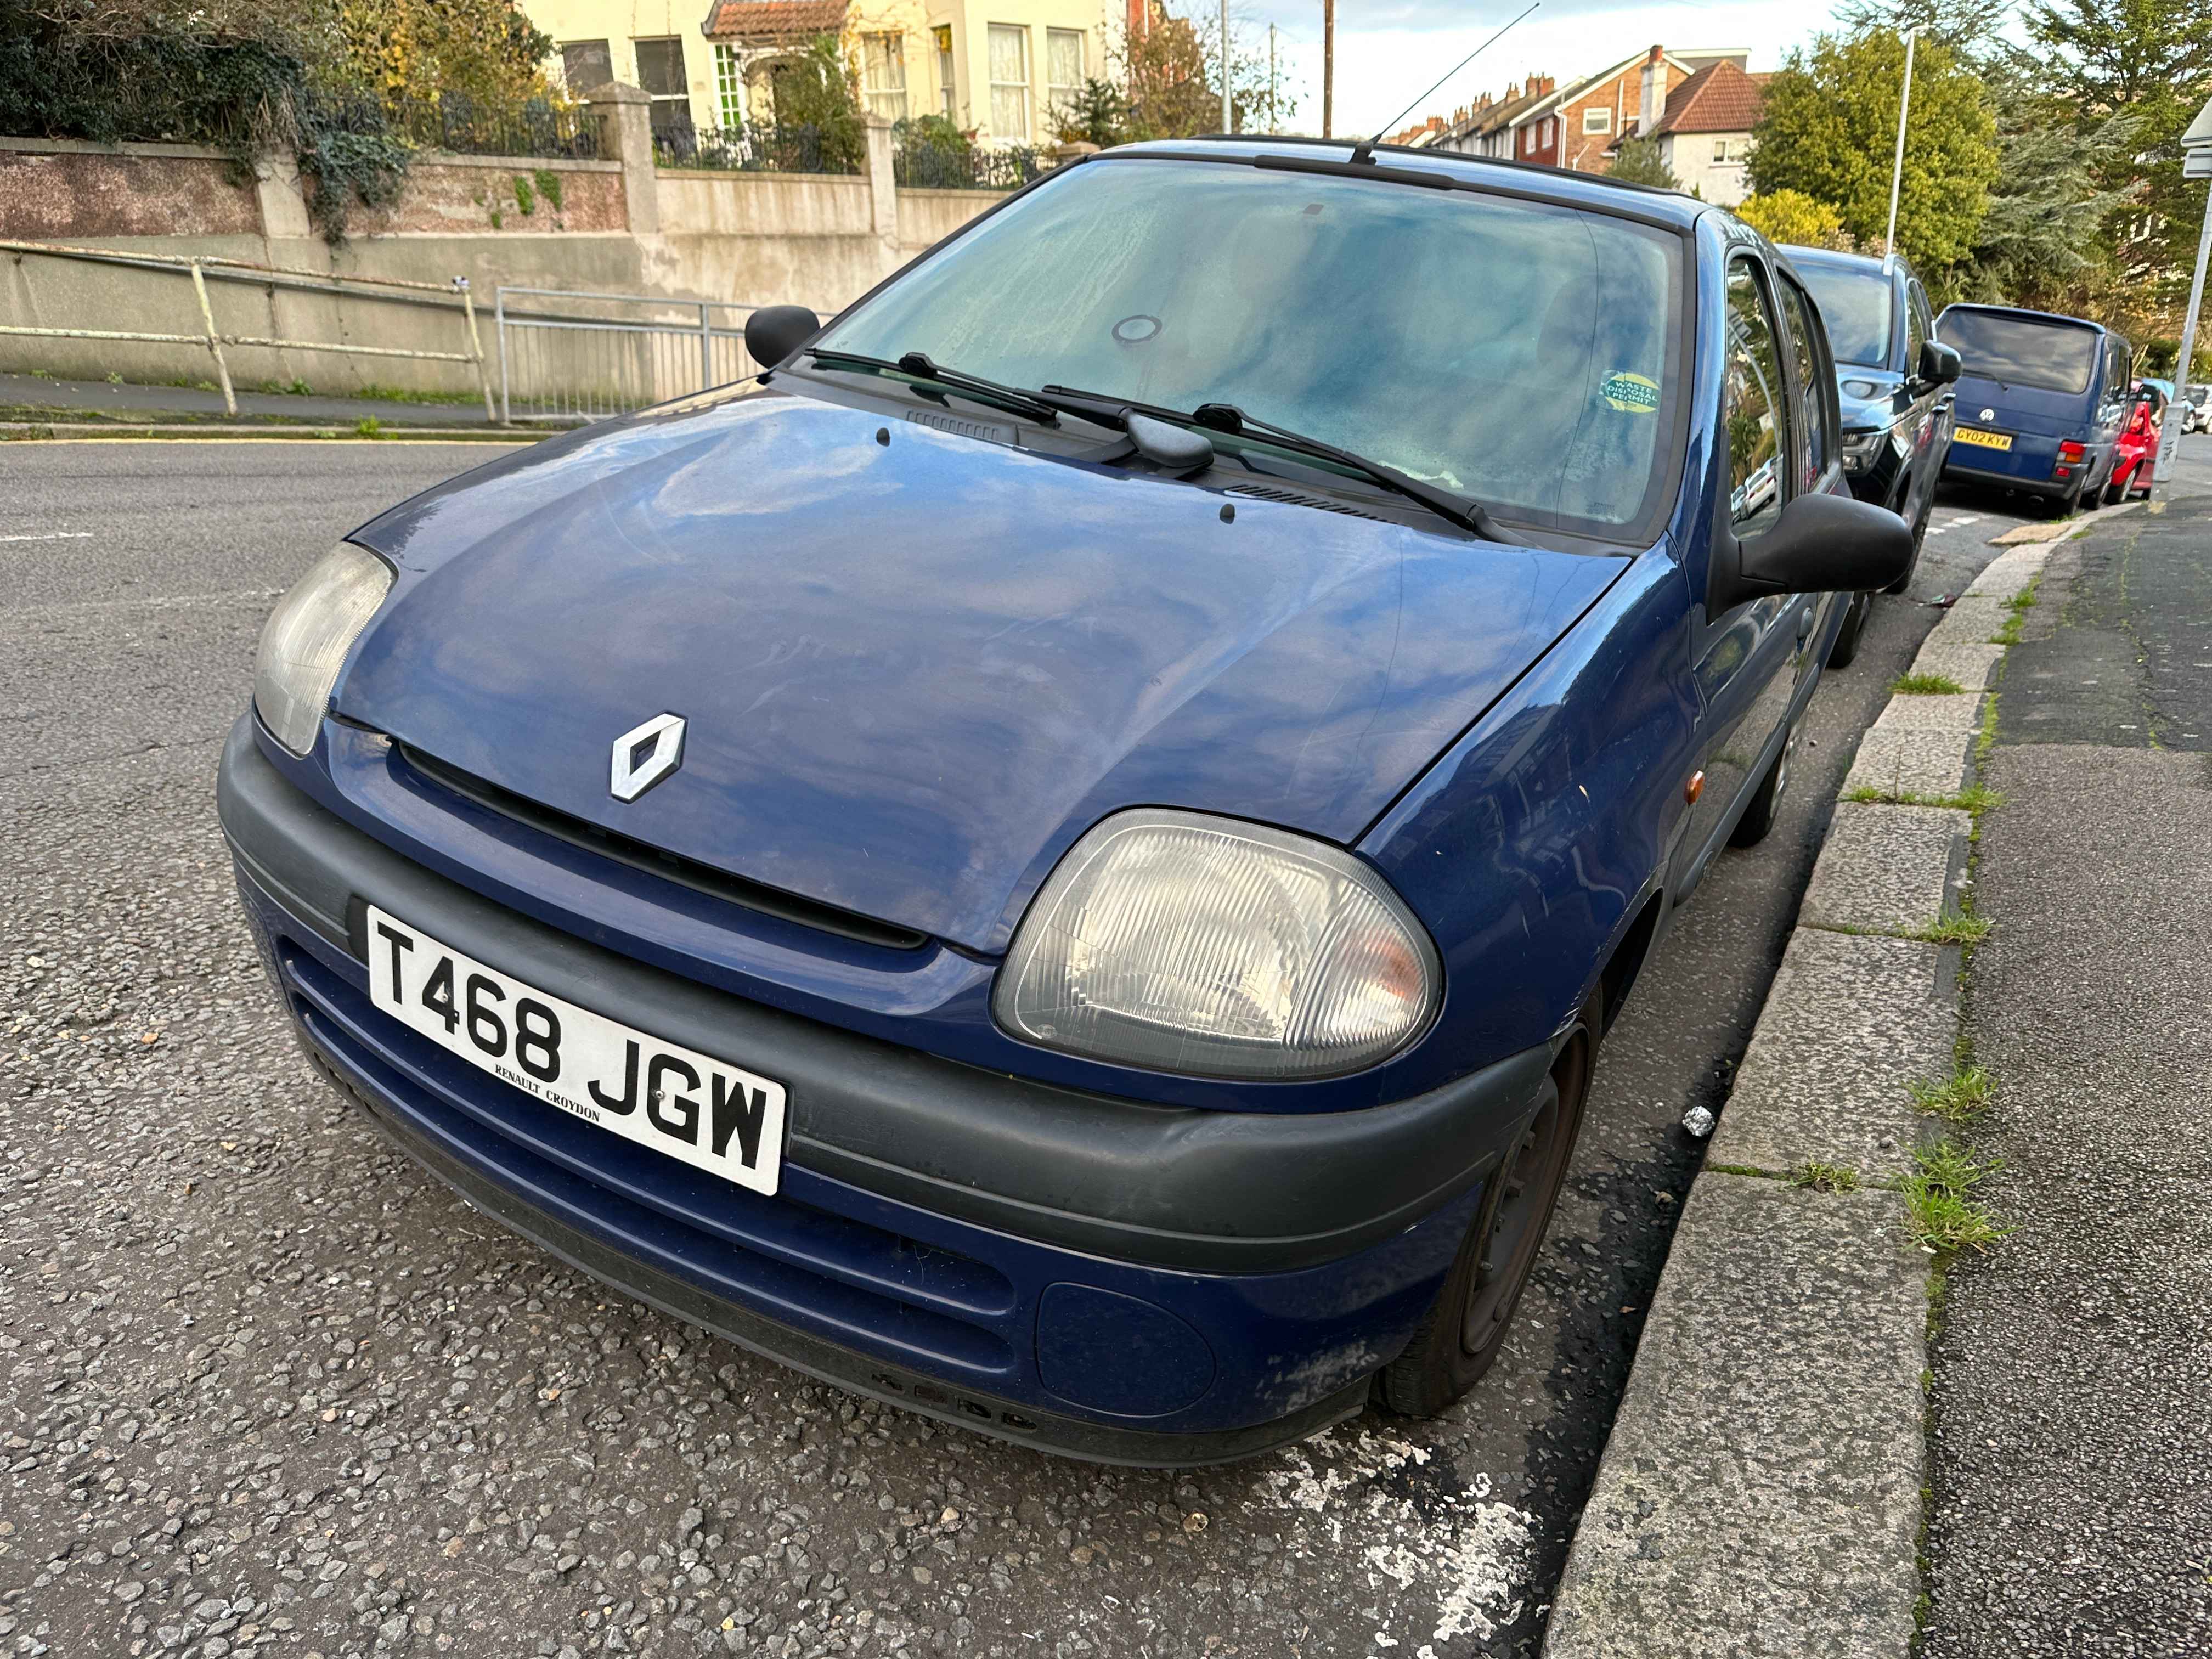 Photograph of T468 JGW - a Blue Renault Clio parked in Hollingdean by a non-resident. The first of two photographs supplied by the residents of Hollingdean.